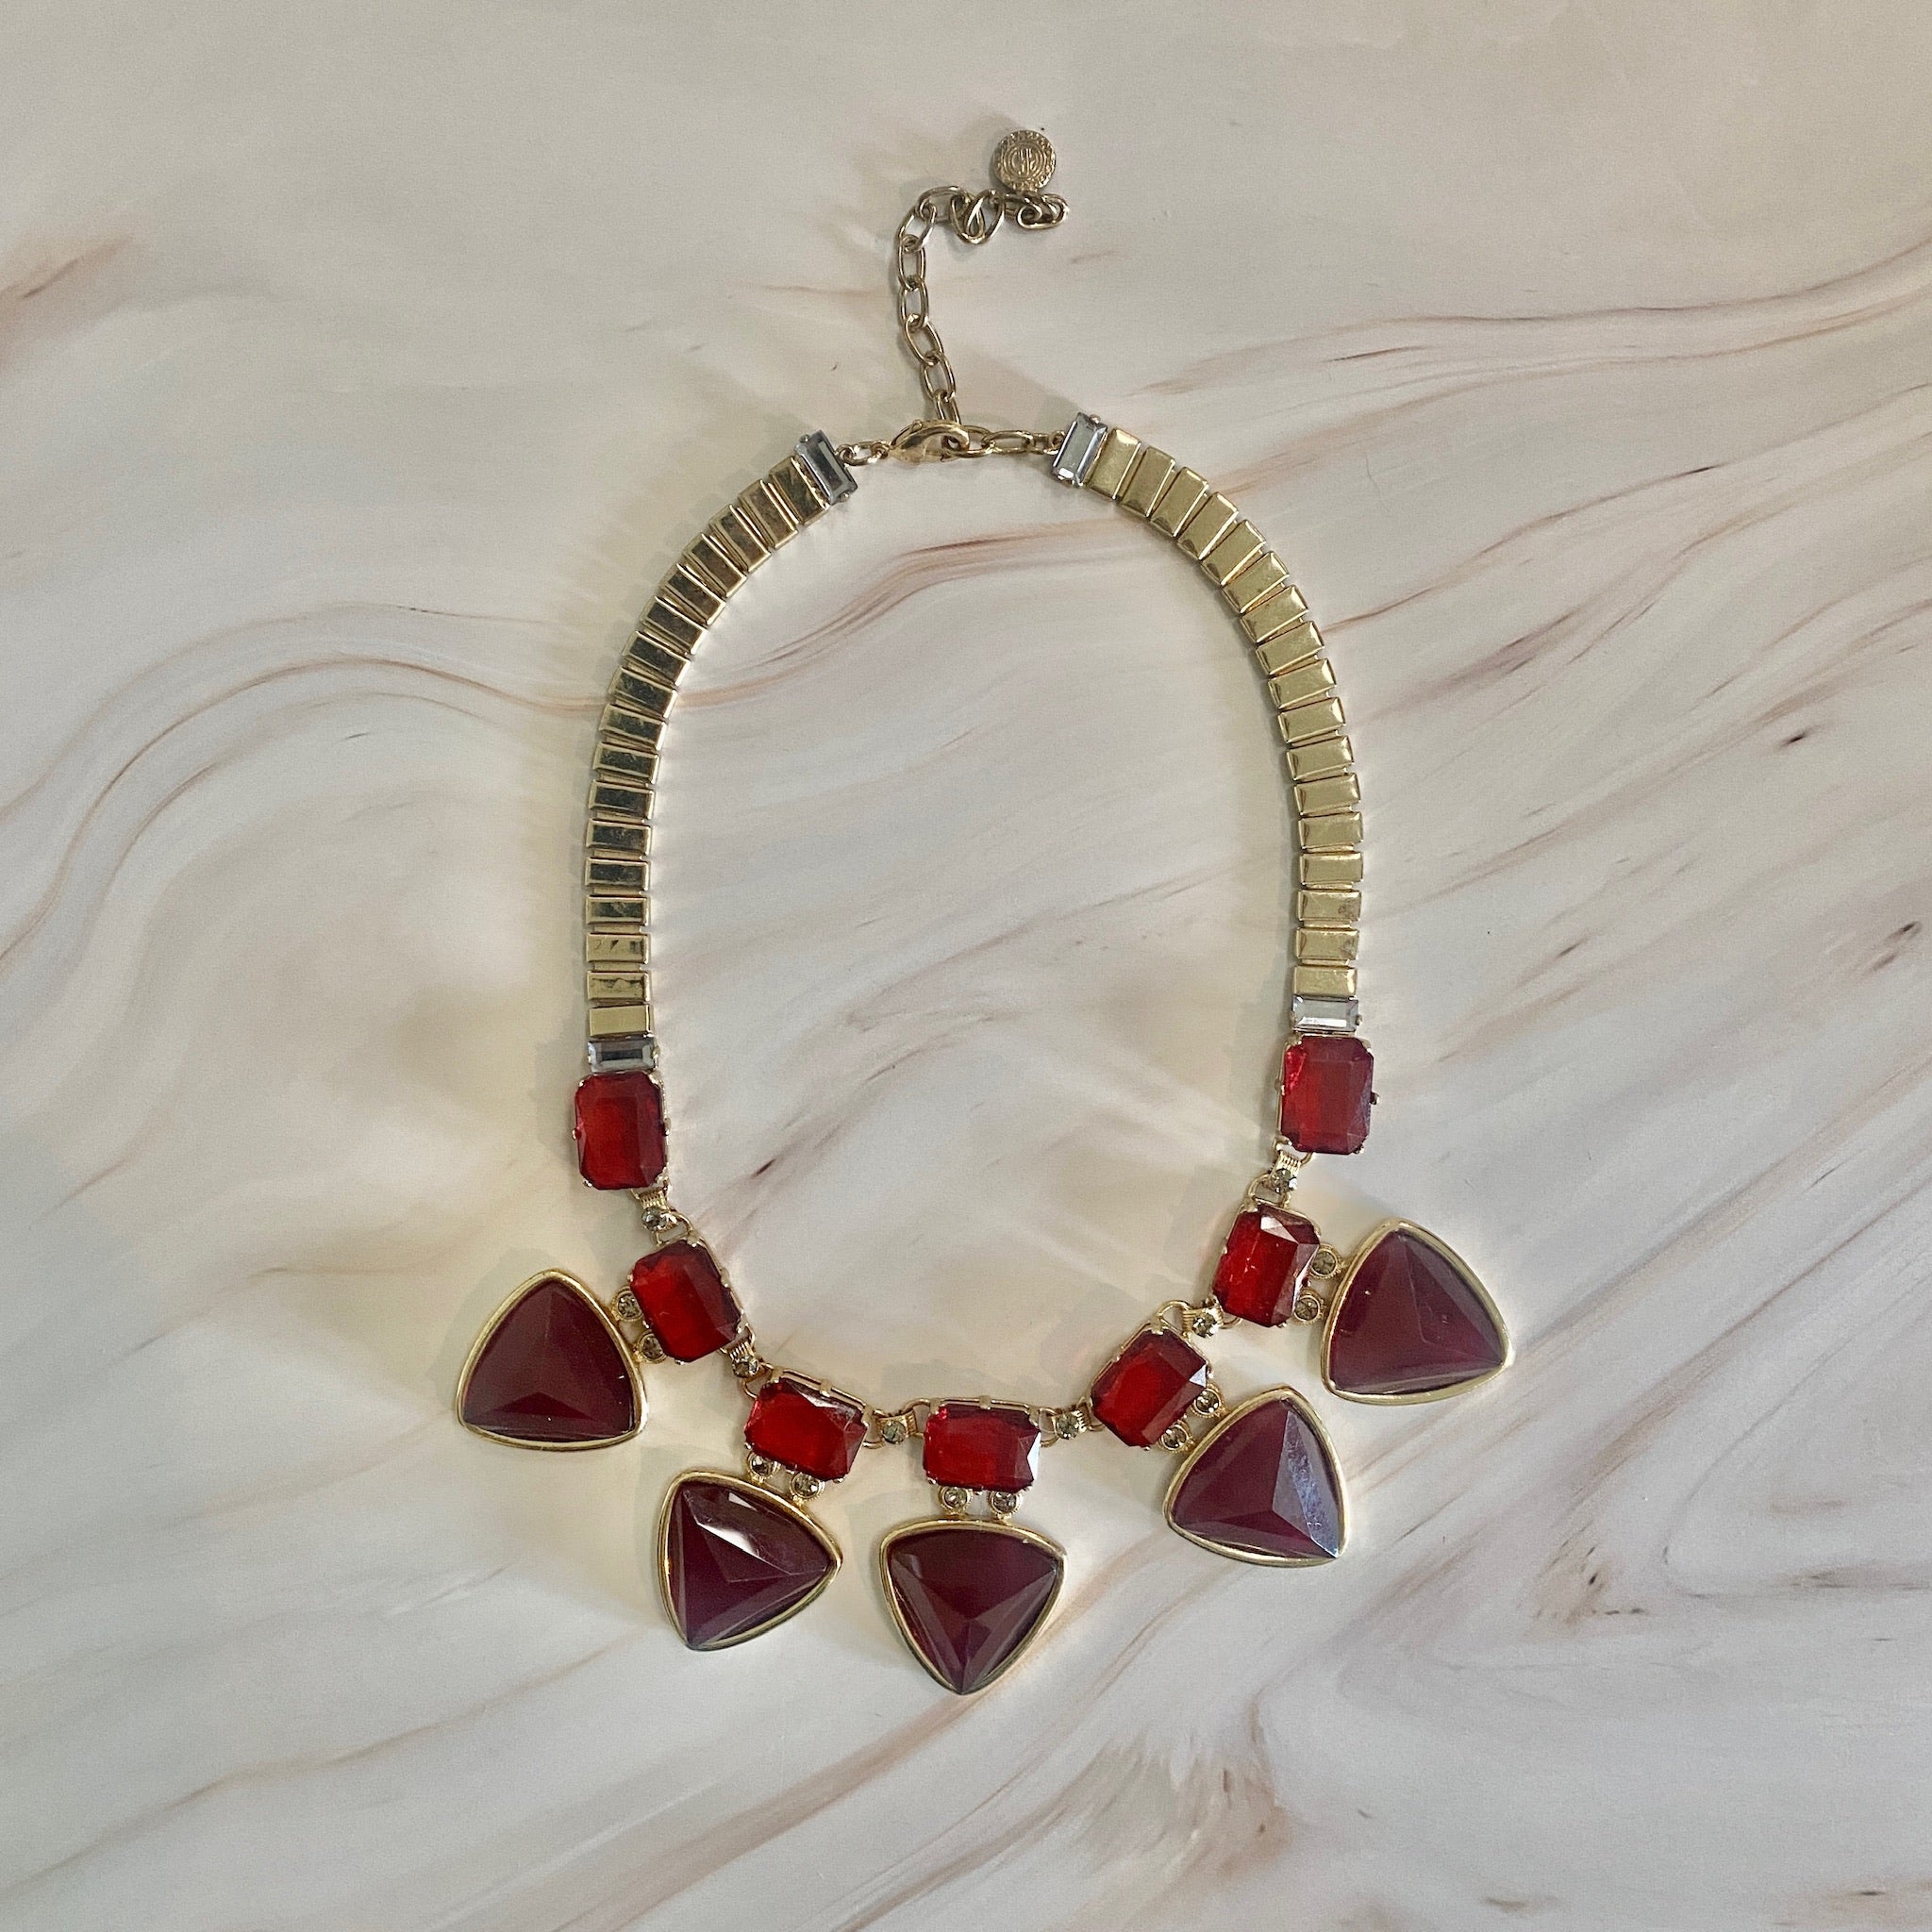 Handcrafted necklace with burgundy tassels by Amoliconcepts | The Secret  Label